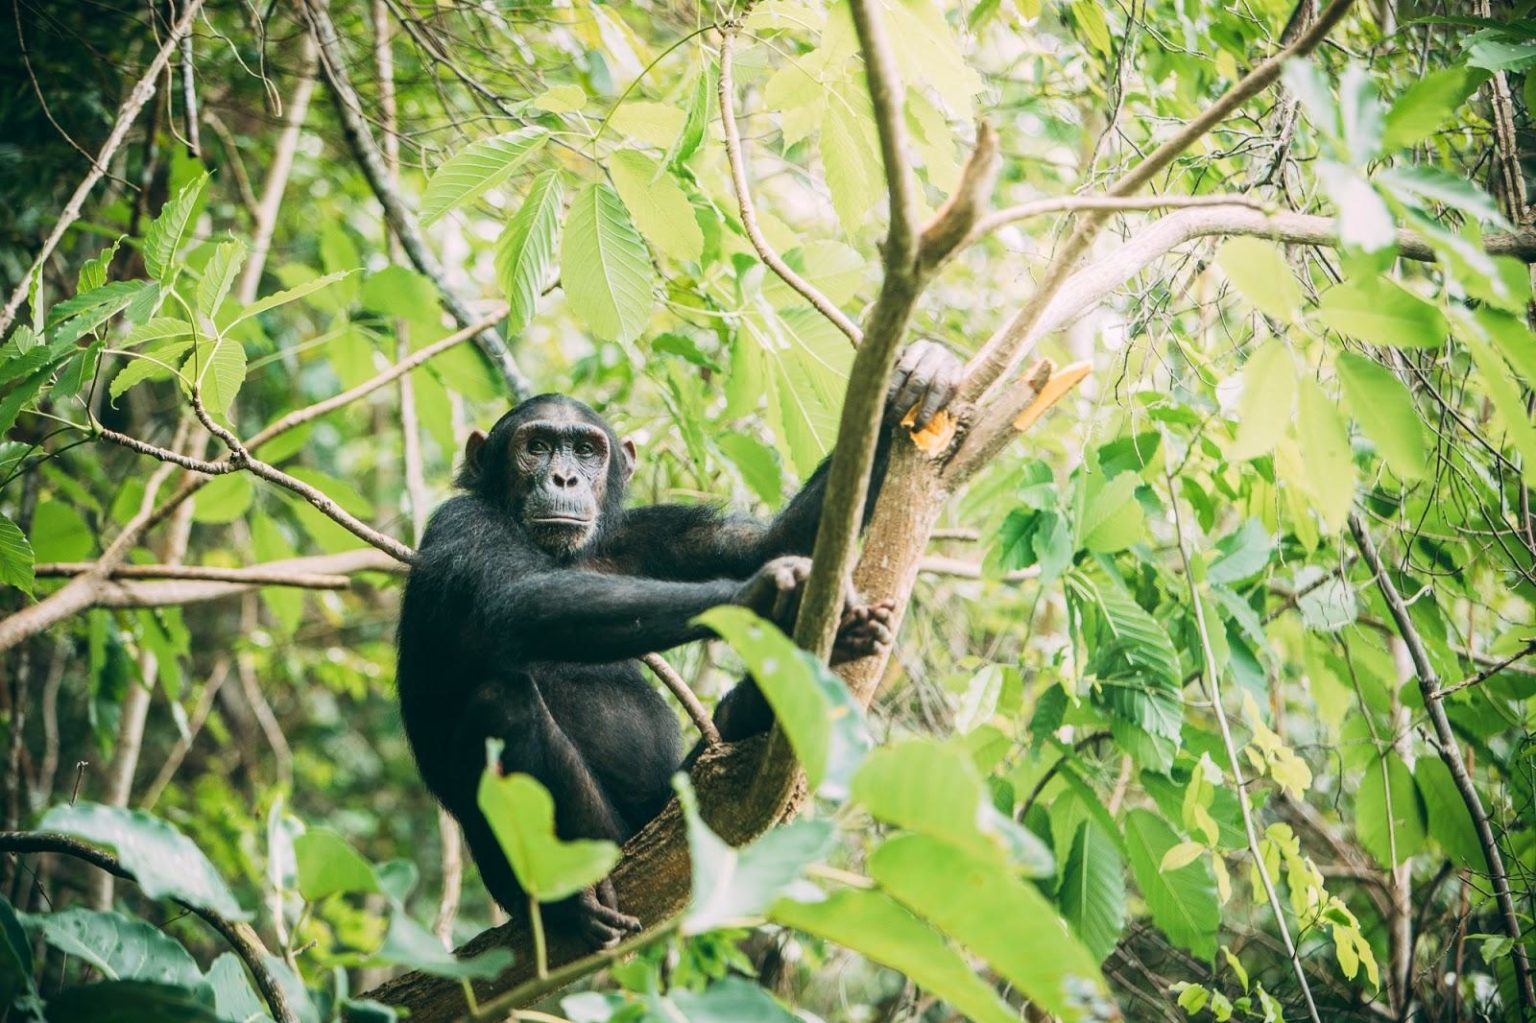 chimp holding onto branches in a green canopy of trees